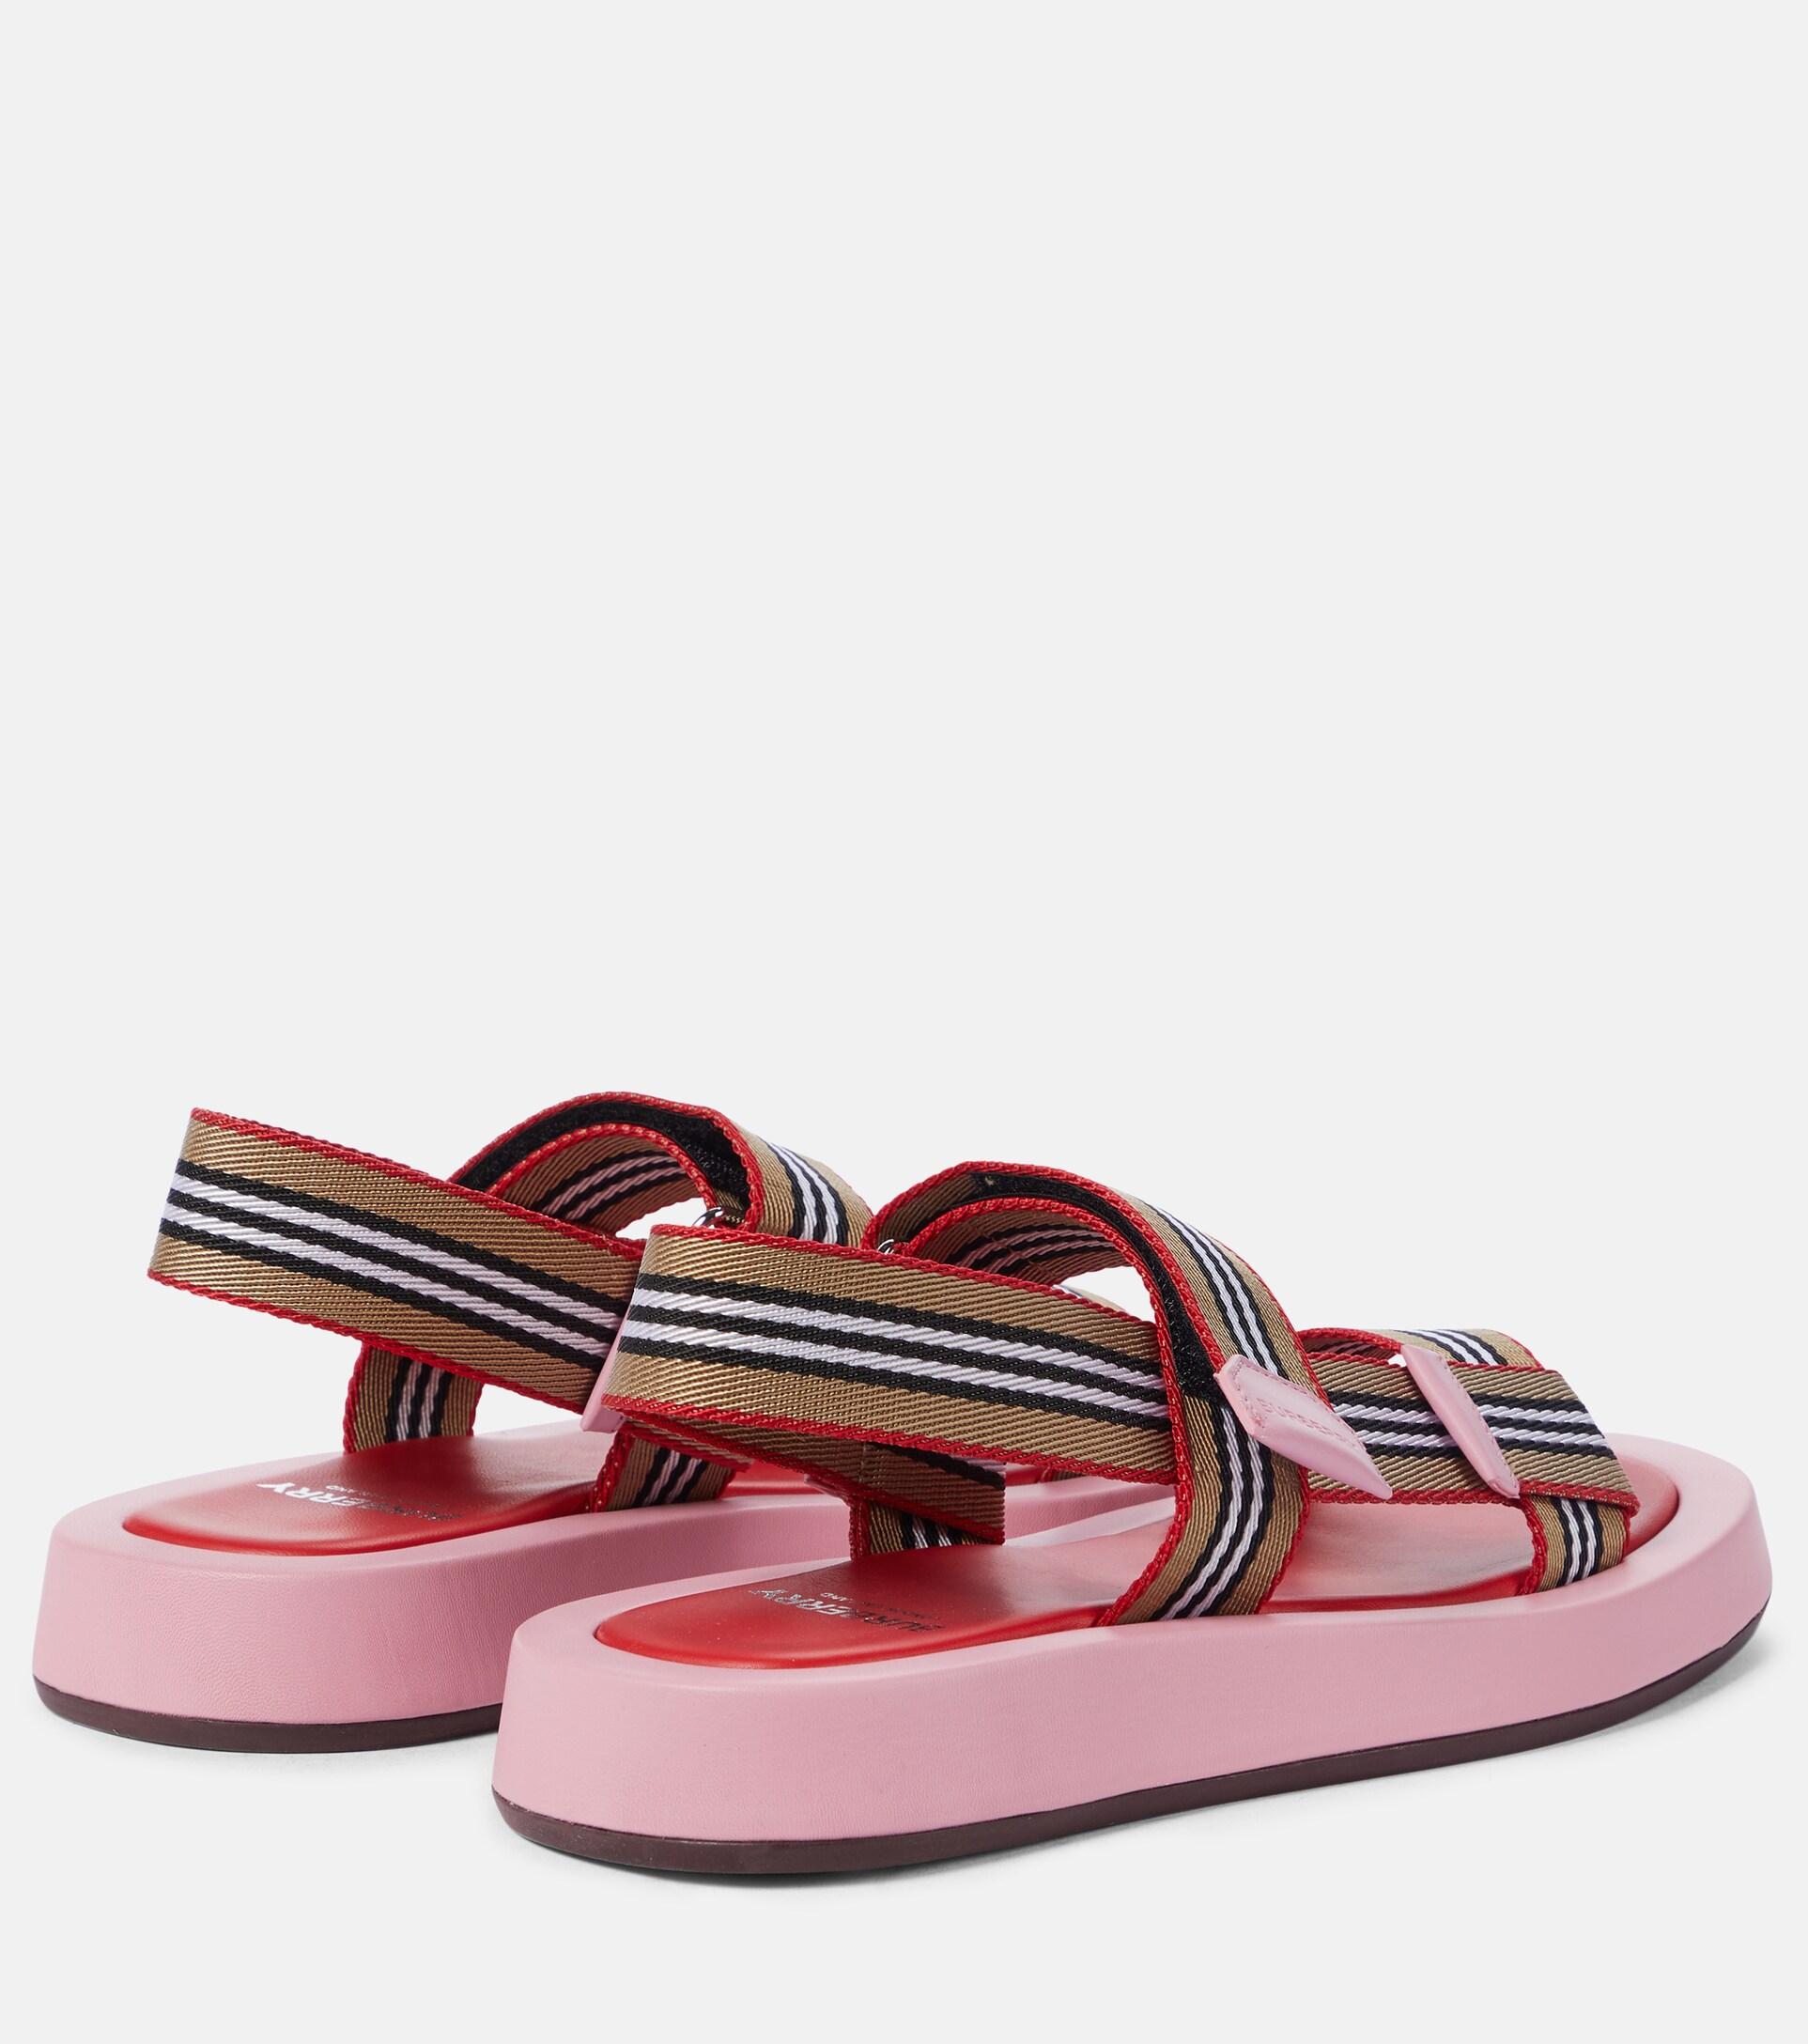 Burberry Icon Stripe Canvas Sandals in Pink | Lyst